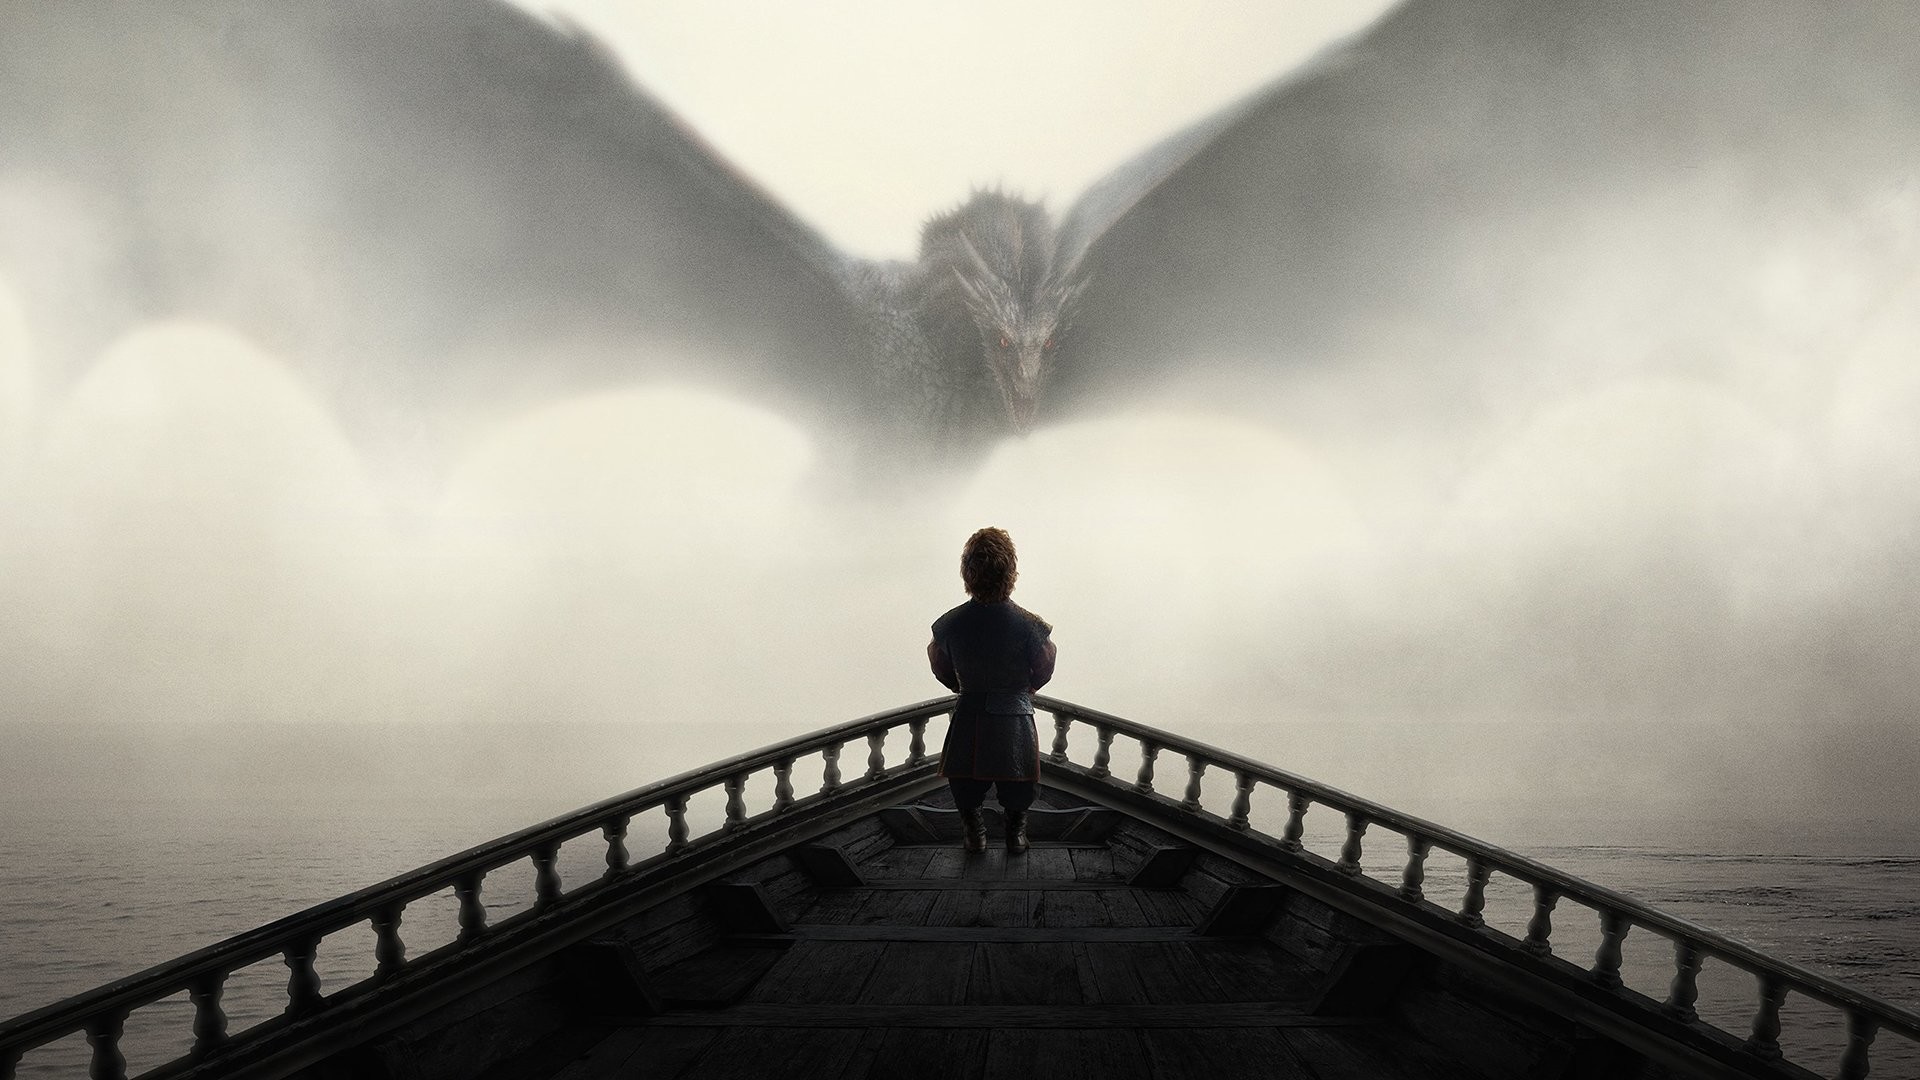 HD Wallpaper Background ID637668. TV Show Game Of Thrones